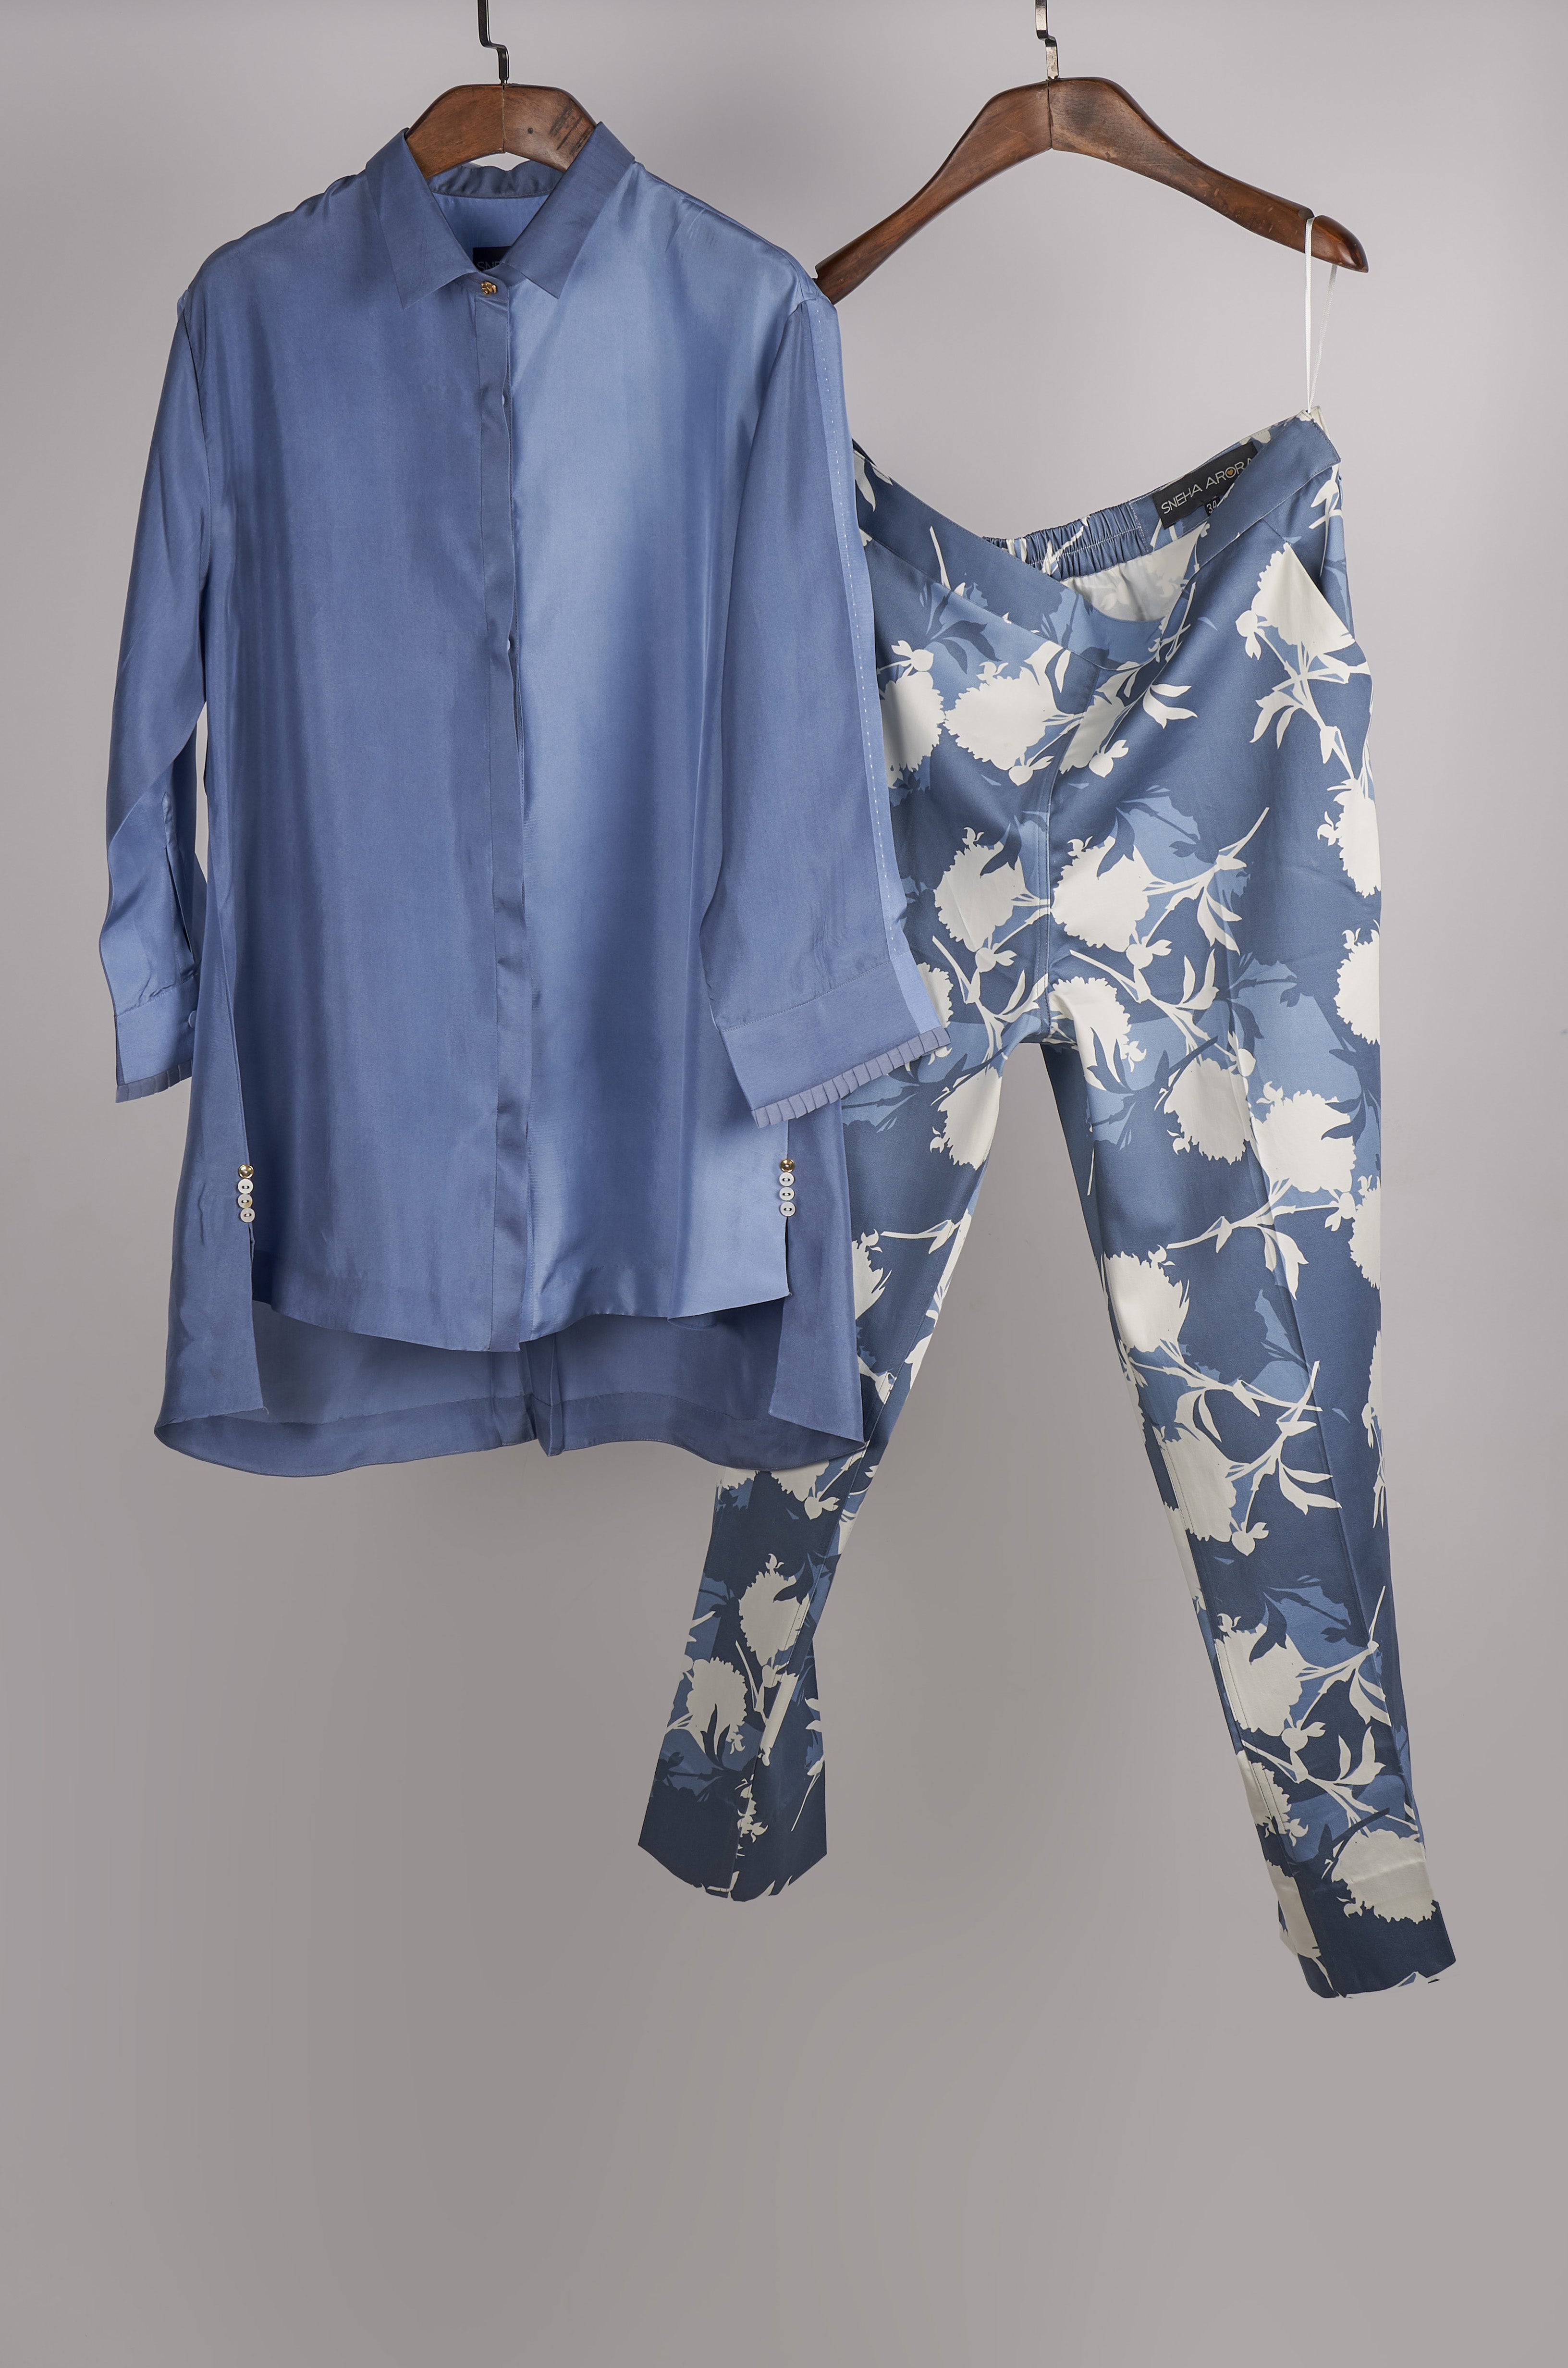 Shades of Blue solid shirt with printed pants Coordinated set